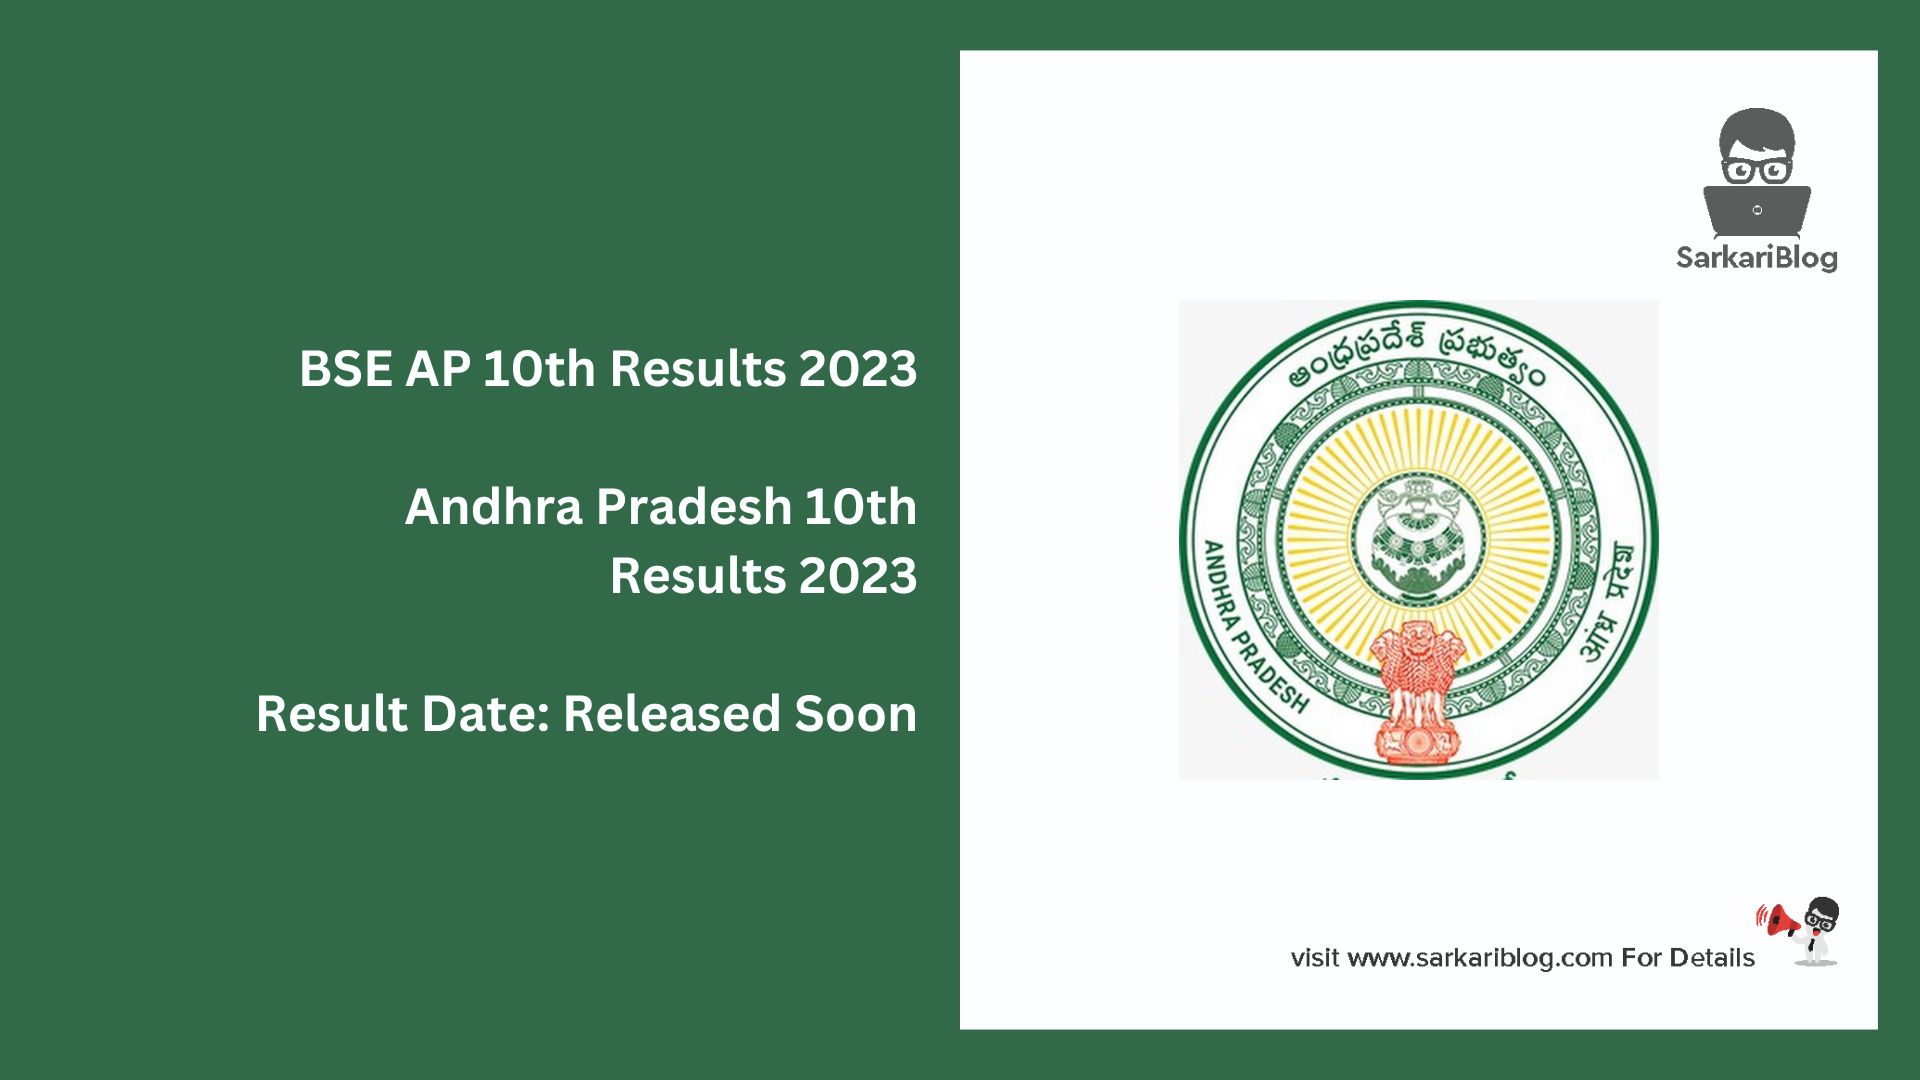 BSE AP 10th Results 2023